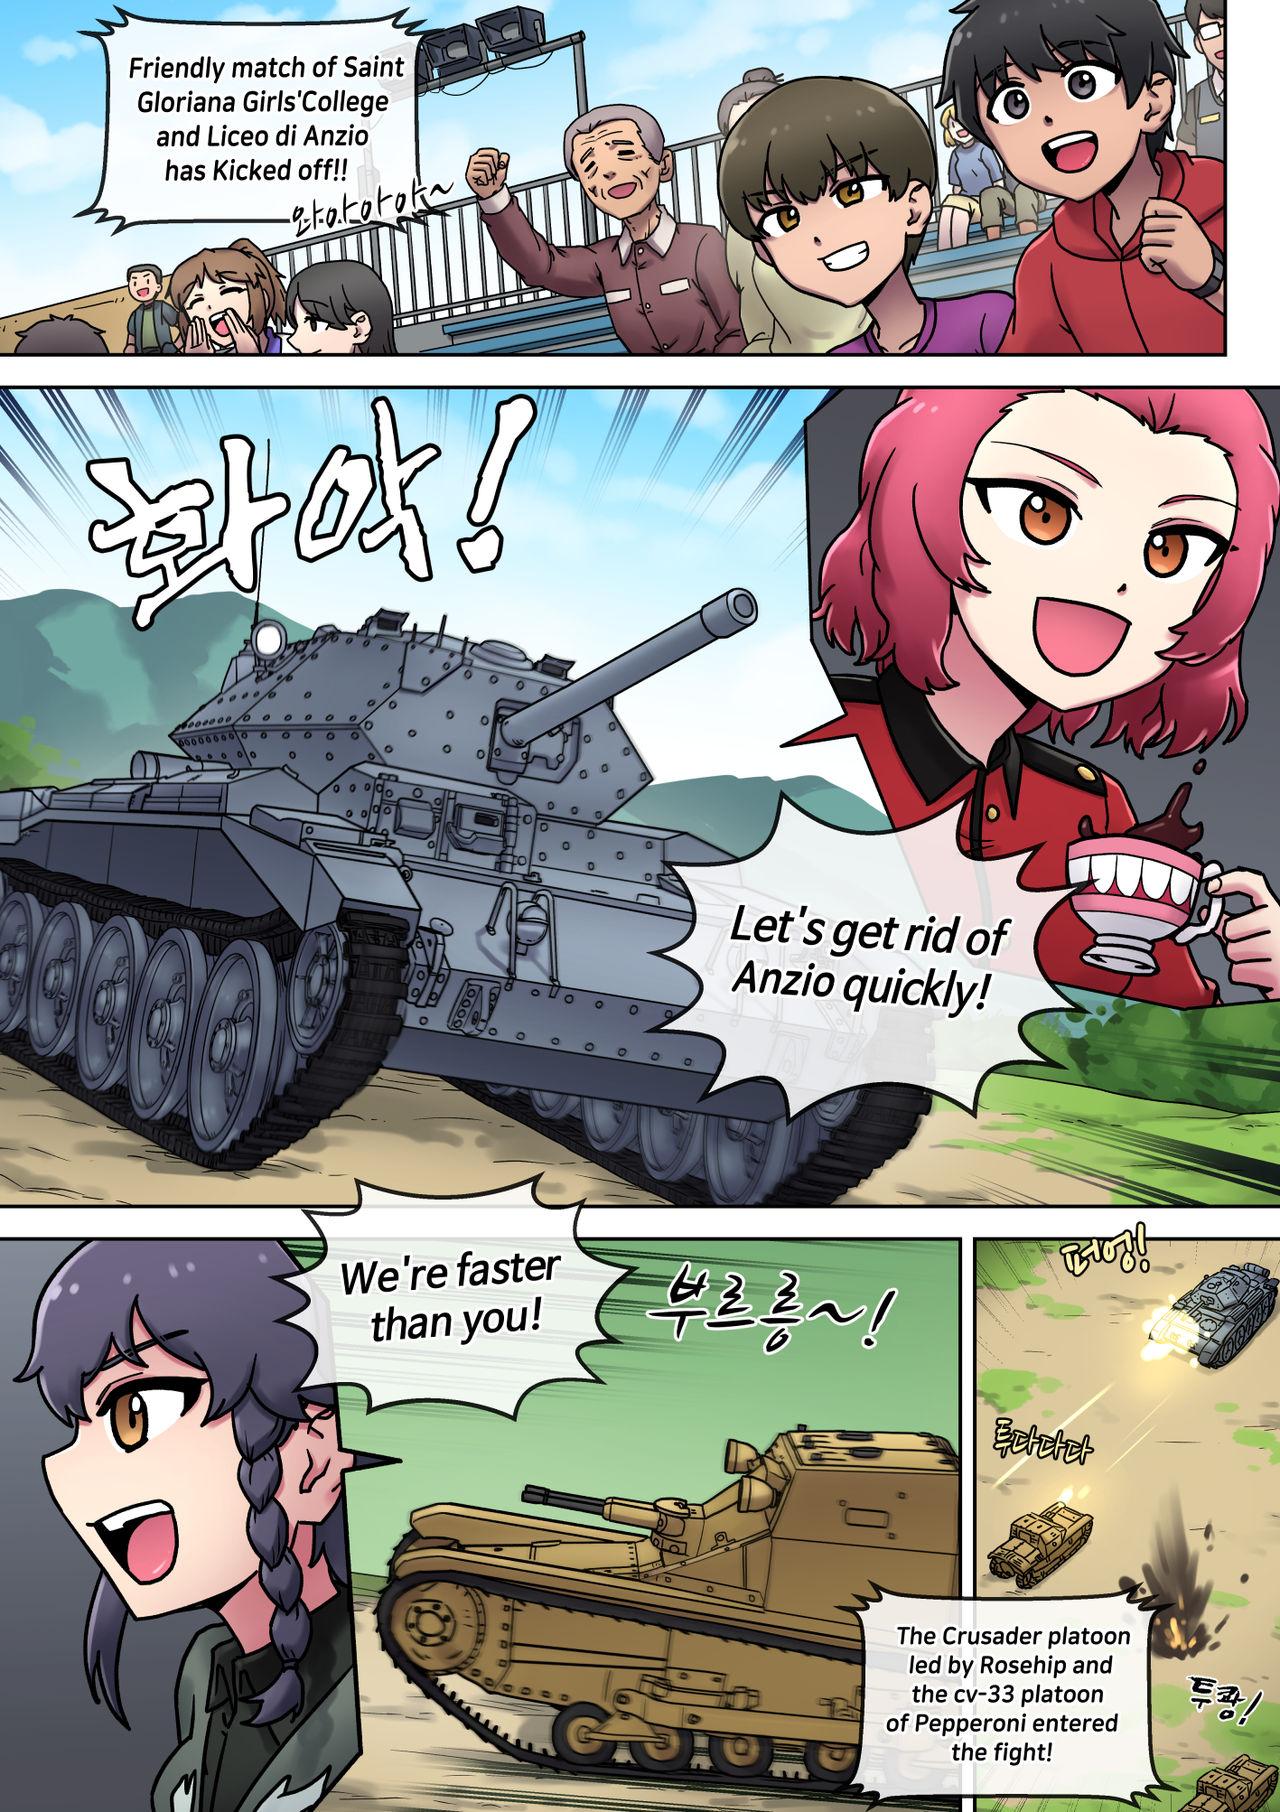 Petite Teenager Black? White? What's your choice? - Girls und panzer Skirt - Page 3